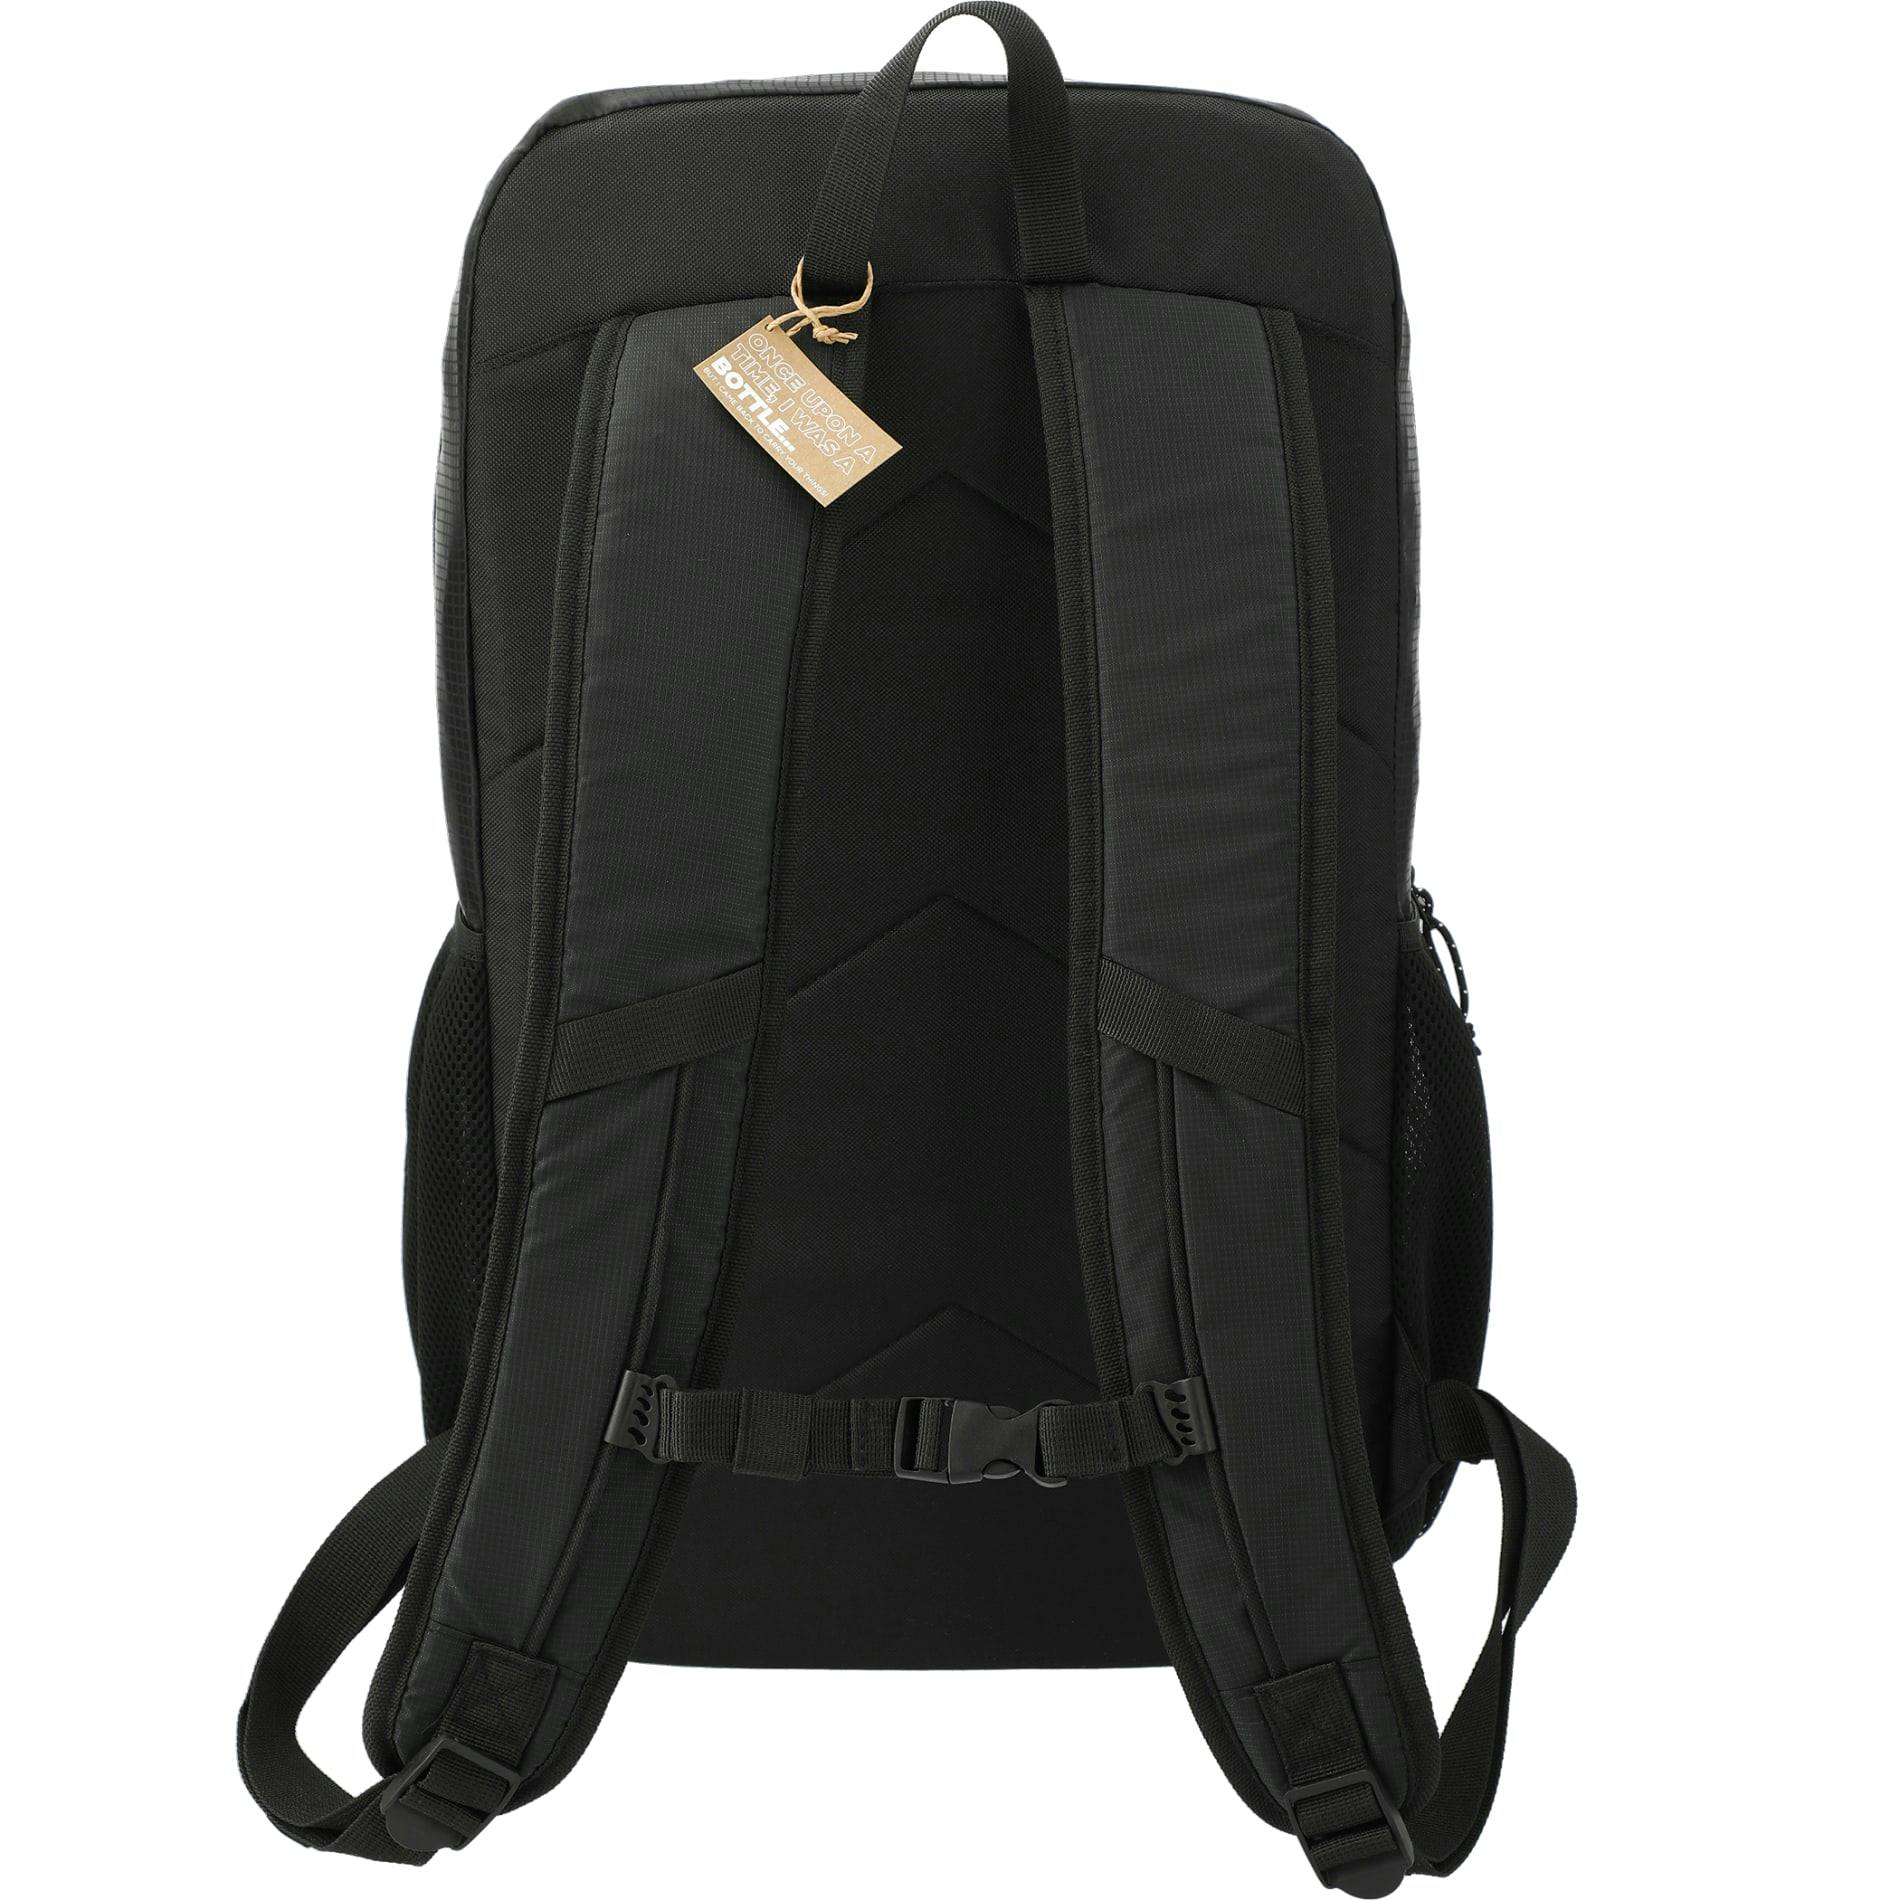 NBN Trailhead Recycled Lightweight 20L Pack - additional Image 1